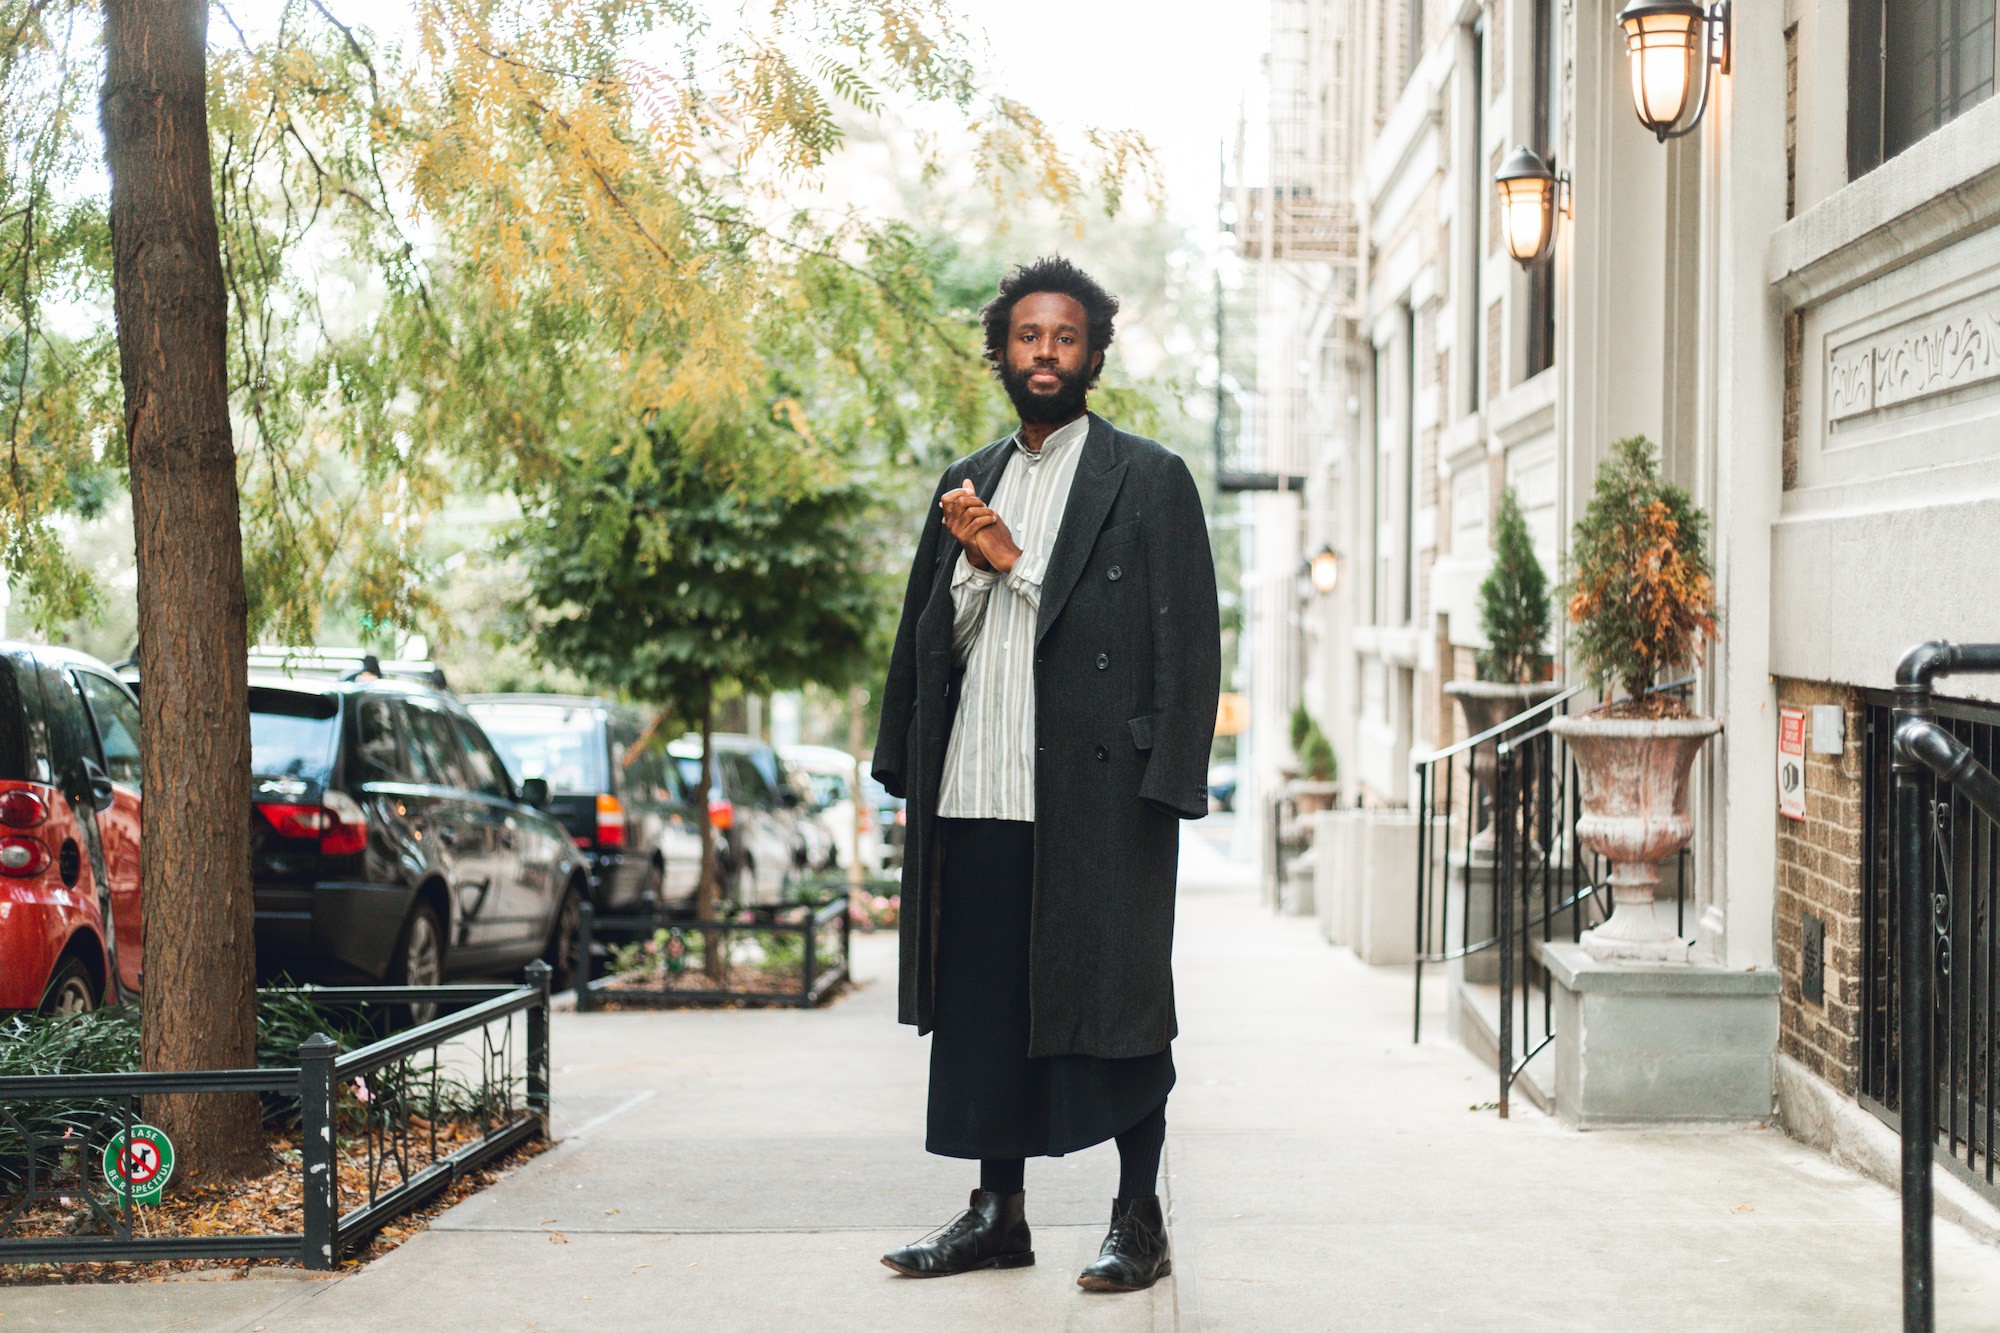 JJJJJerome Ellis stands on the sidewalk between a street tree and building, wearing an overcoat over their shoulders, their hands clasped at their heart, looking into the camera.